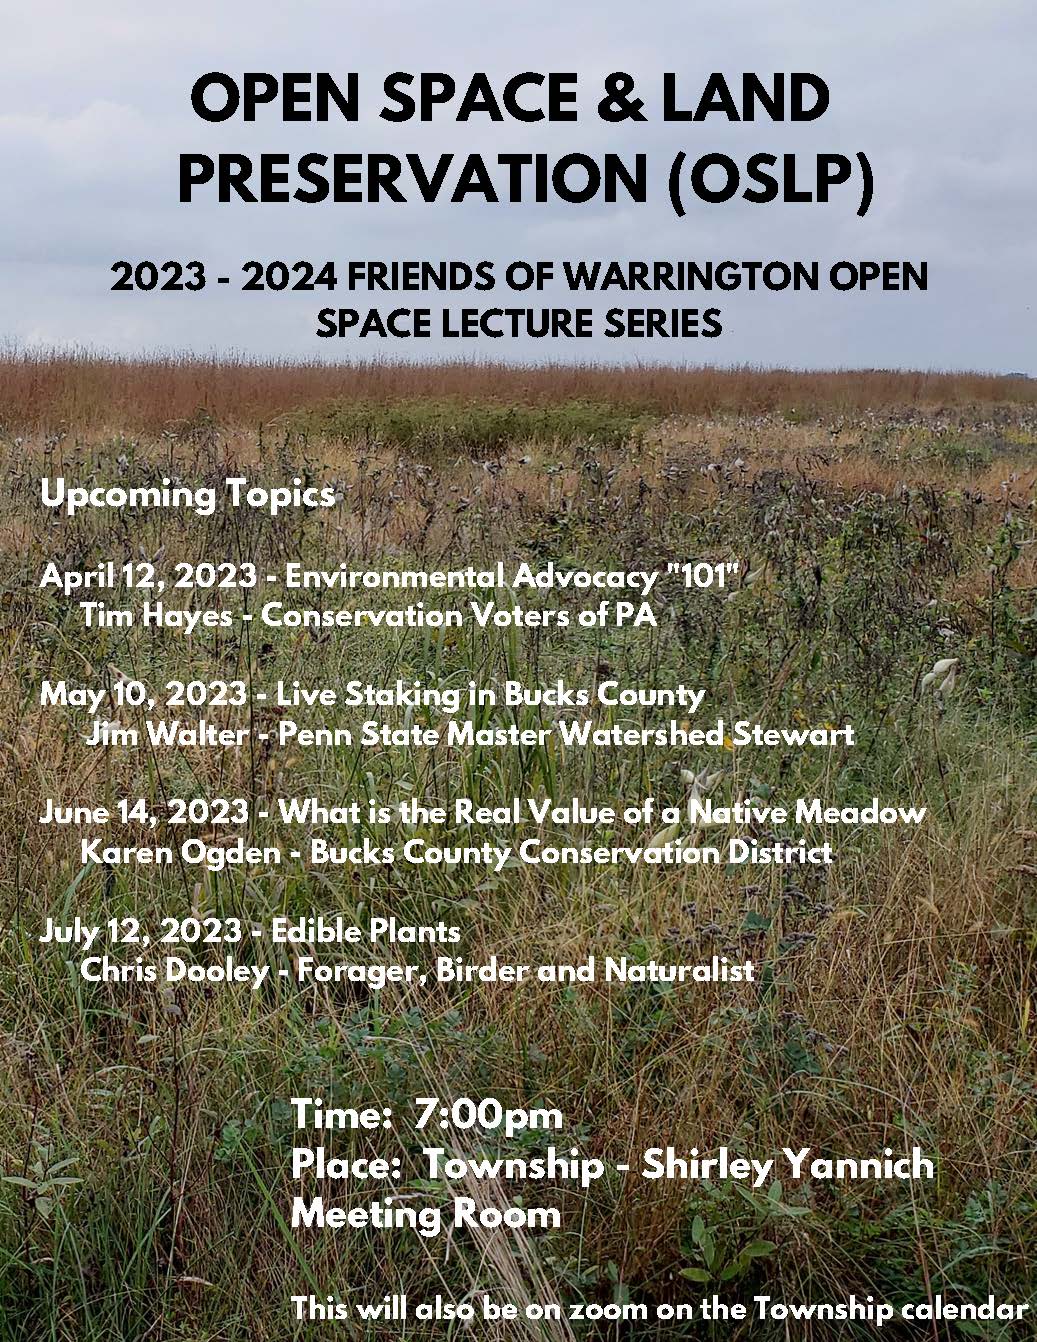 Open Space & Land Preservation: Friends of Warrington Open Space Lecture Series @ Warrington Township Administration Building